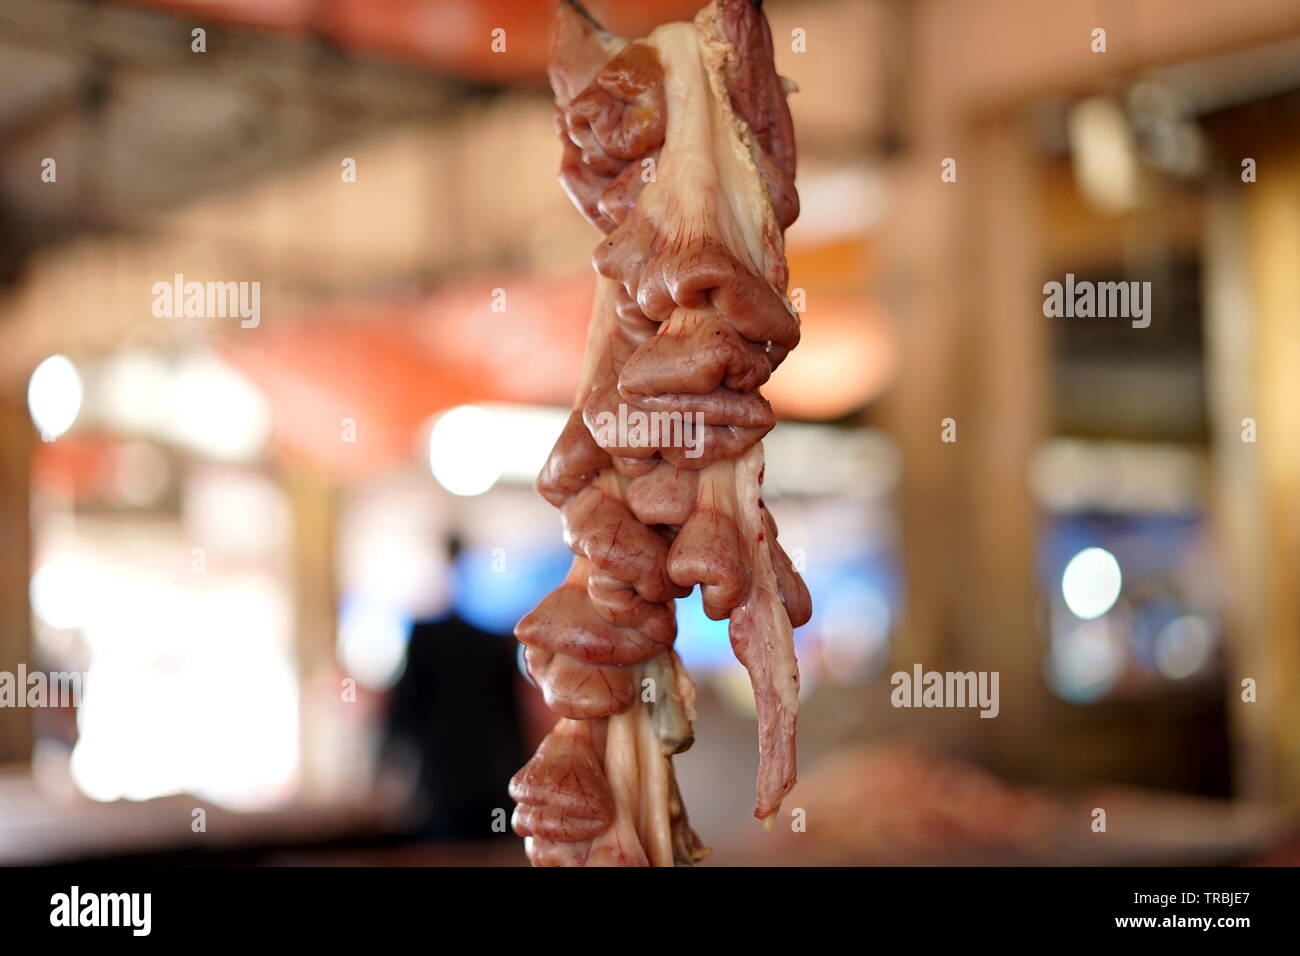 Cow intestines in the abdomen hanging at Slaughterhouse Stock Photo - Alamy